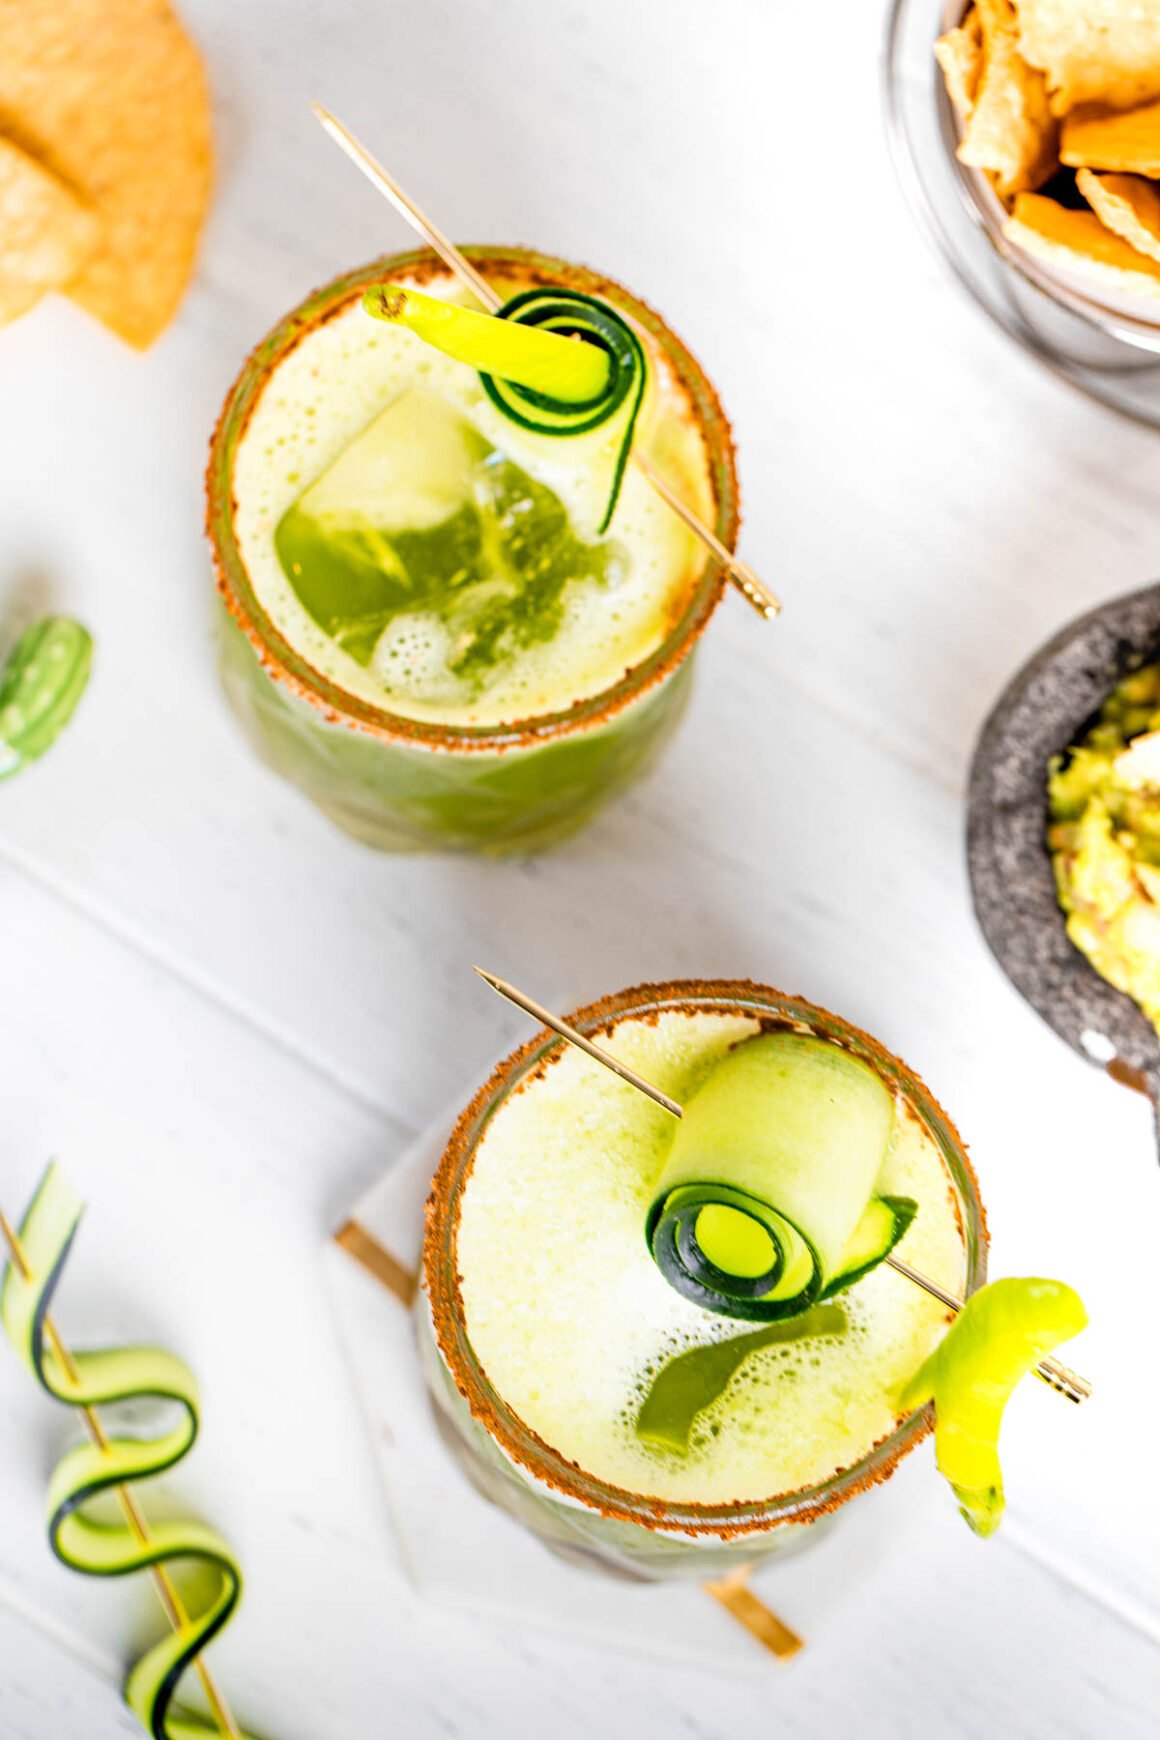 This Aguachile Margarita recipe will blow your mind, it is not only for those who love spiciness, it’s incredible flavor accompanied by a delicious dish will take you to another level!

